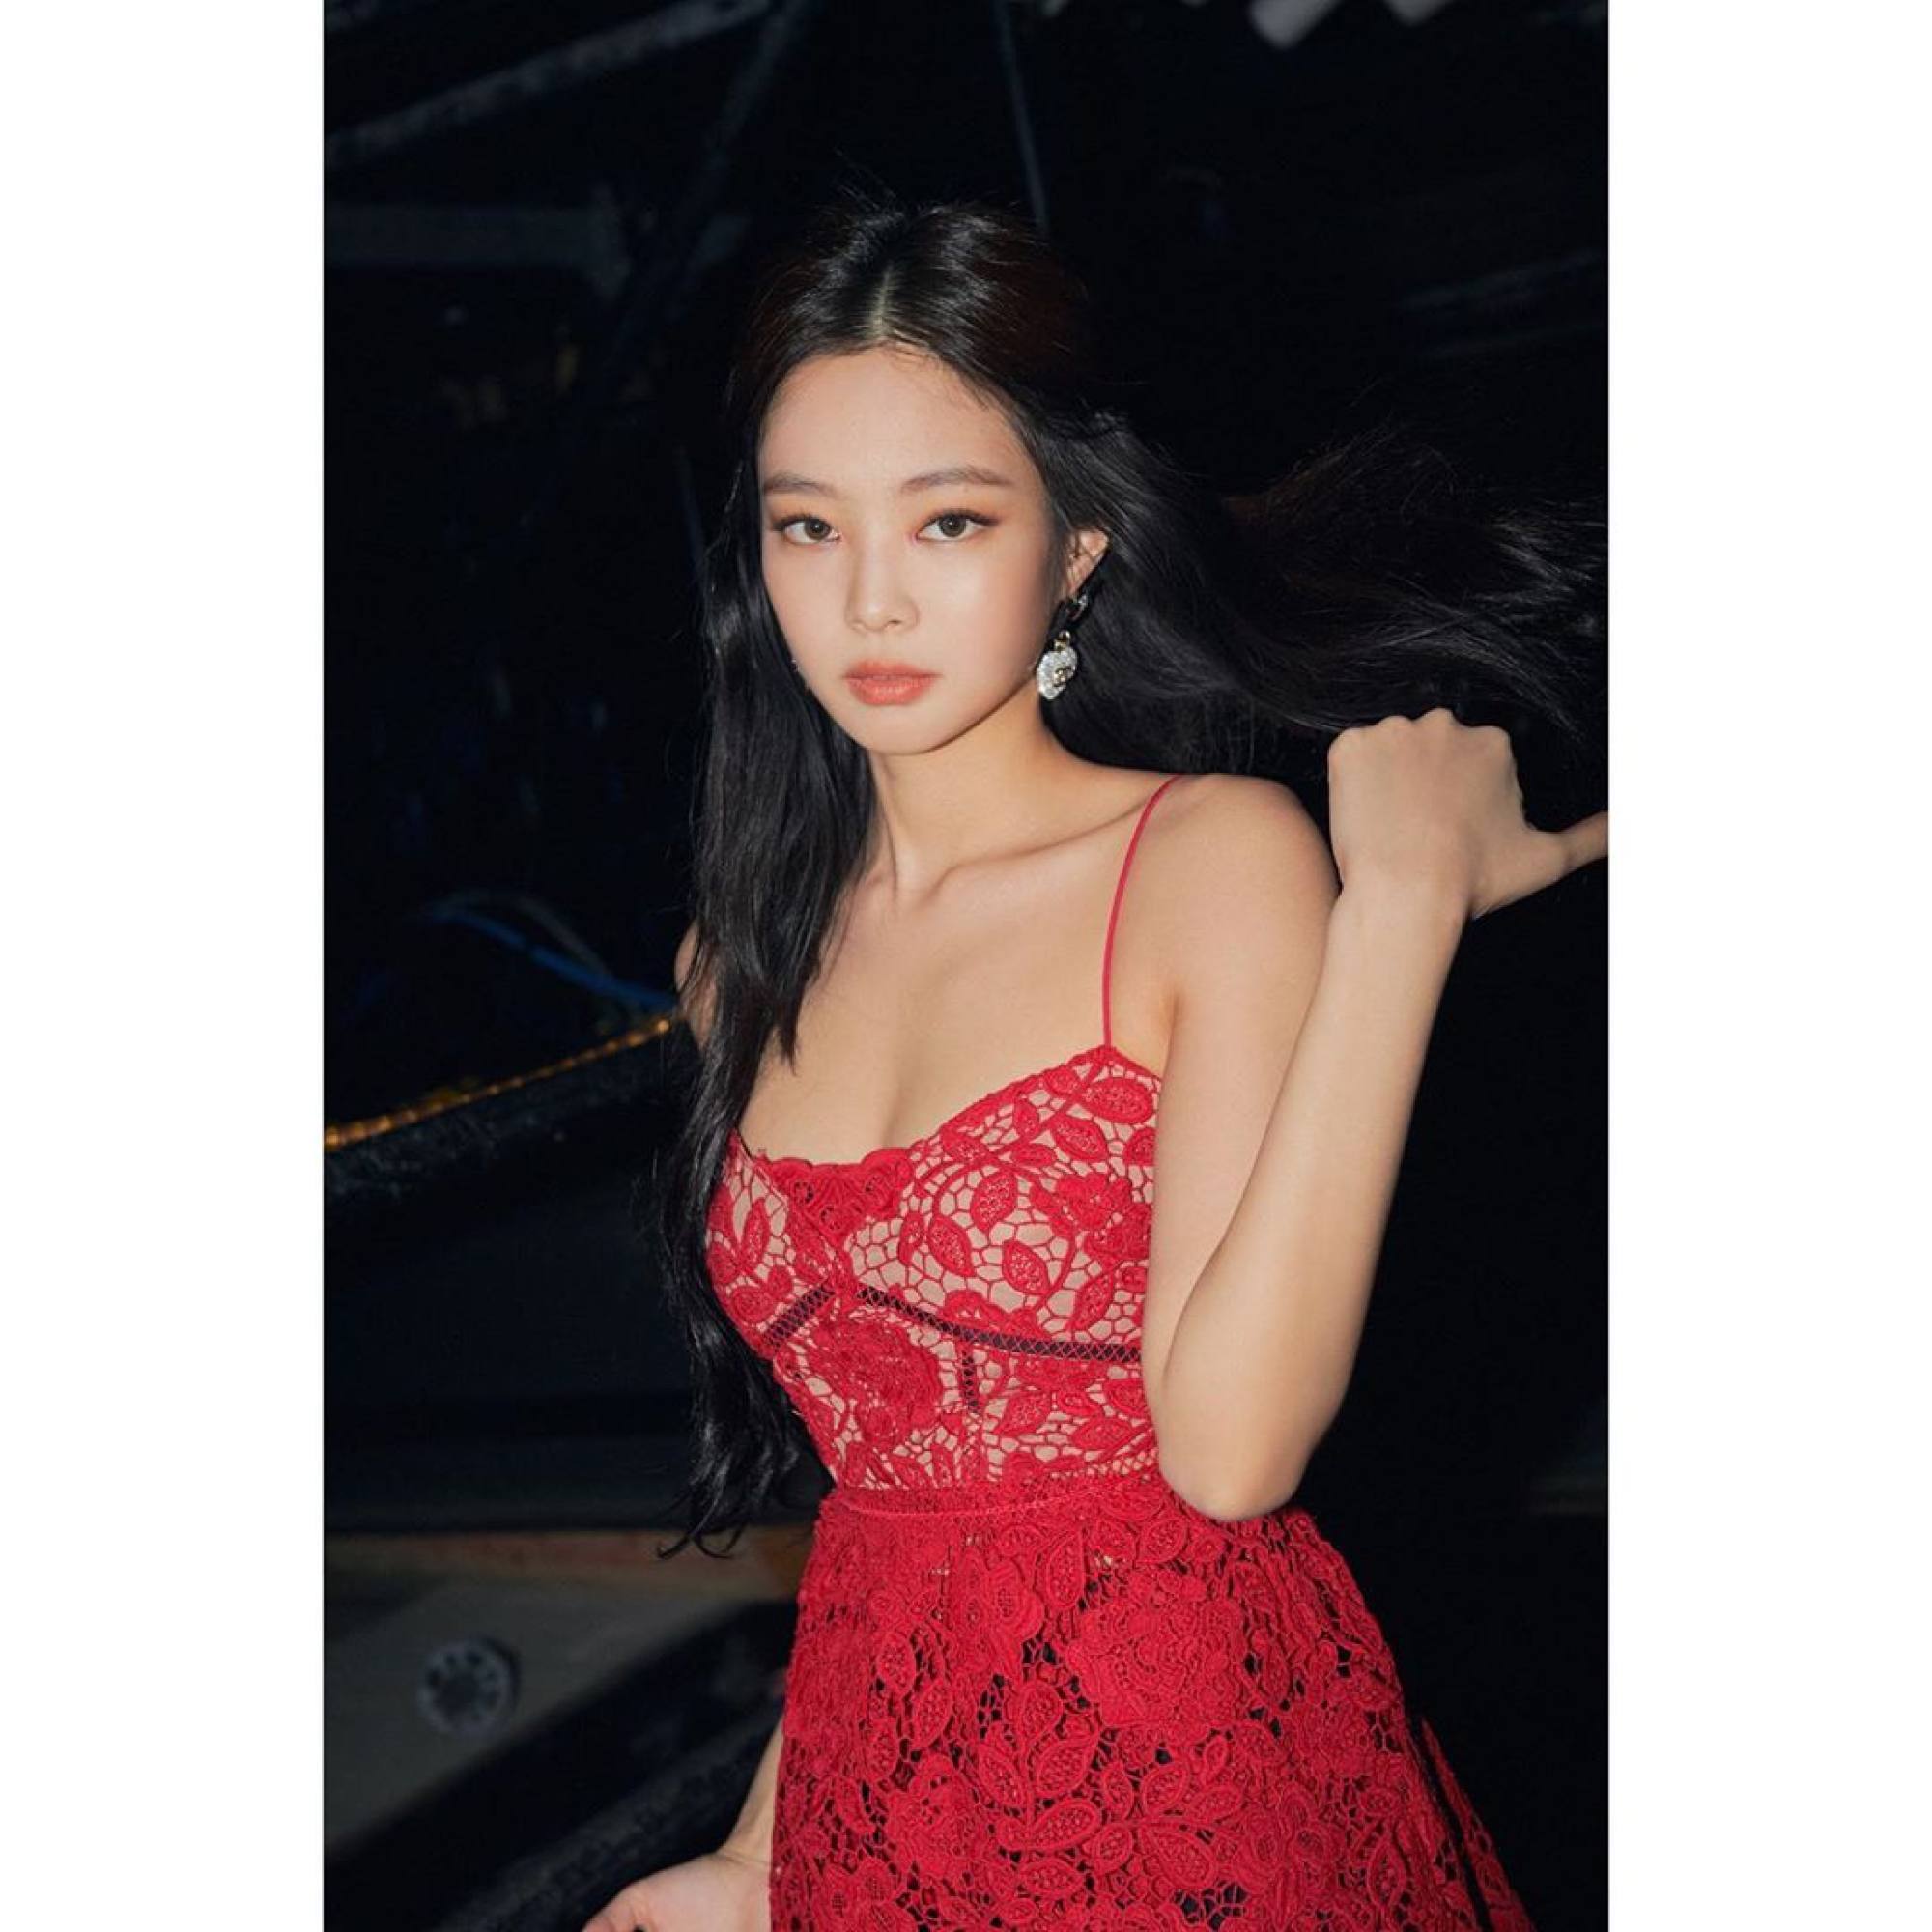 Not just Chanel: 5 other luxury brands Blackpink's Jennie loves, from  Jacquemus and Marine Serre, to custom Mugler with Lisa, Jisoo and Rosé for  the 'Pink Venom' MV, and Alexander Wang